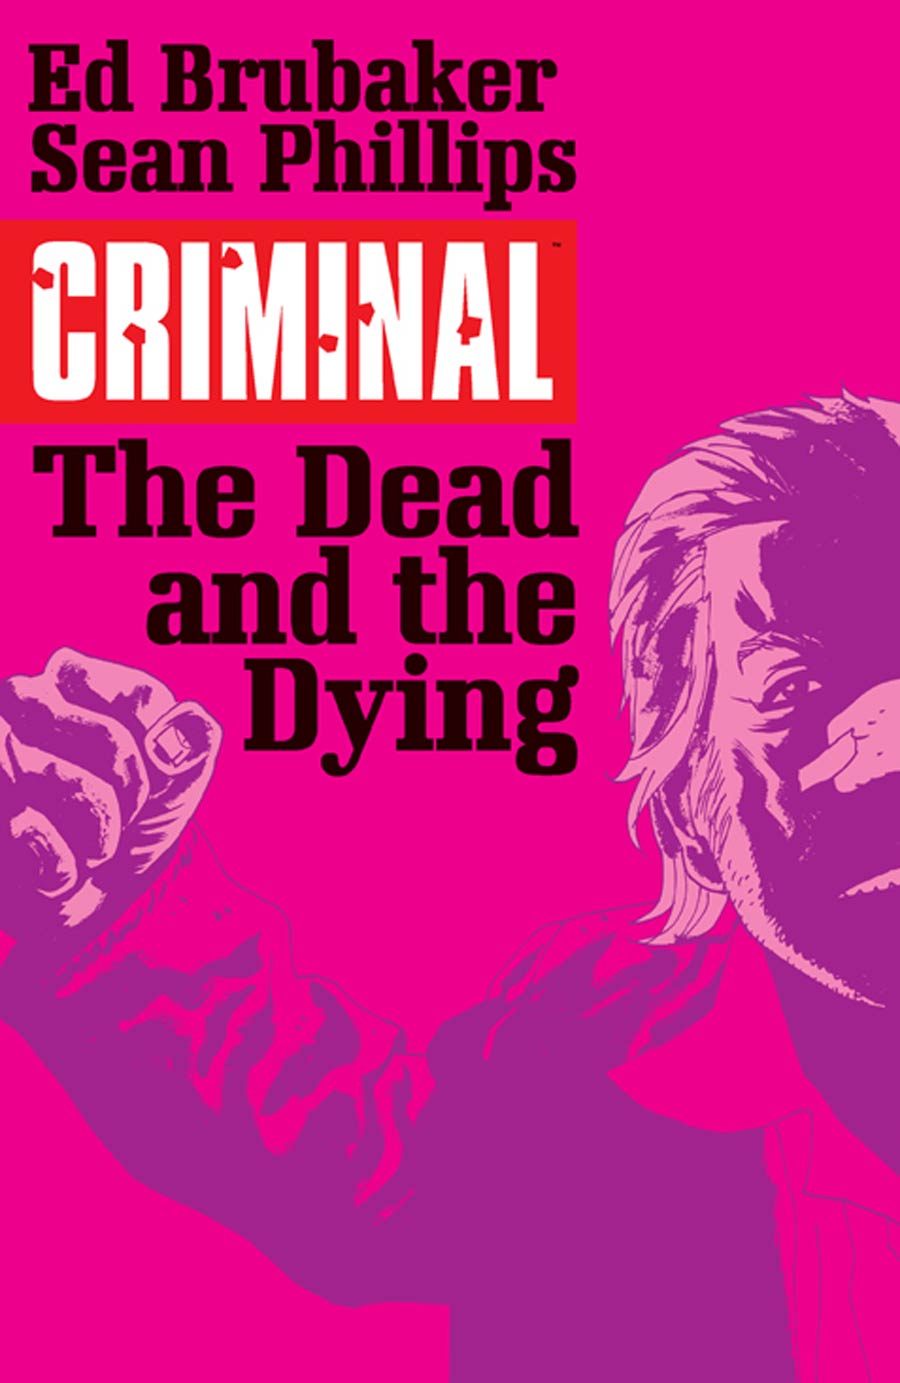 Criminal Vol 3 The Dead And The Dying TP Image Edition